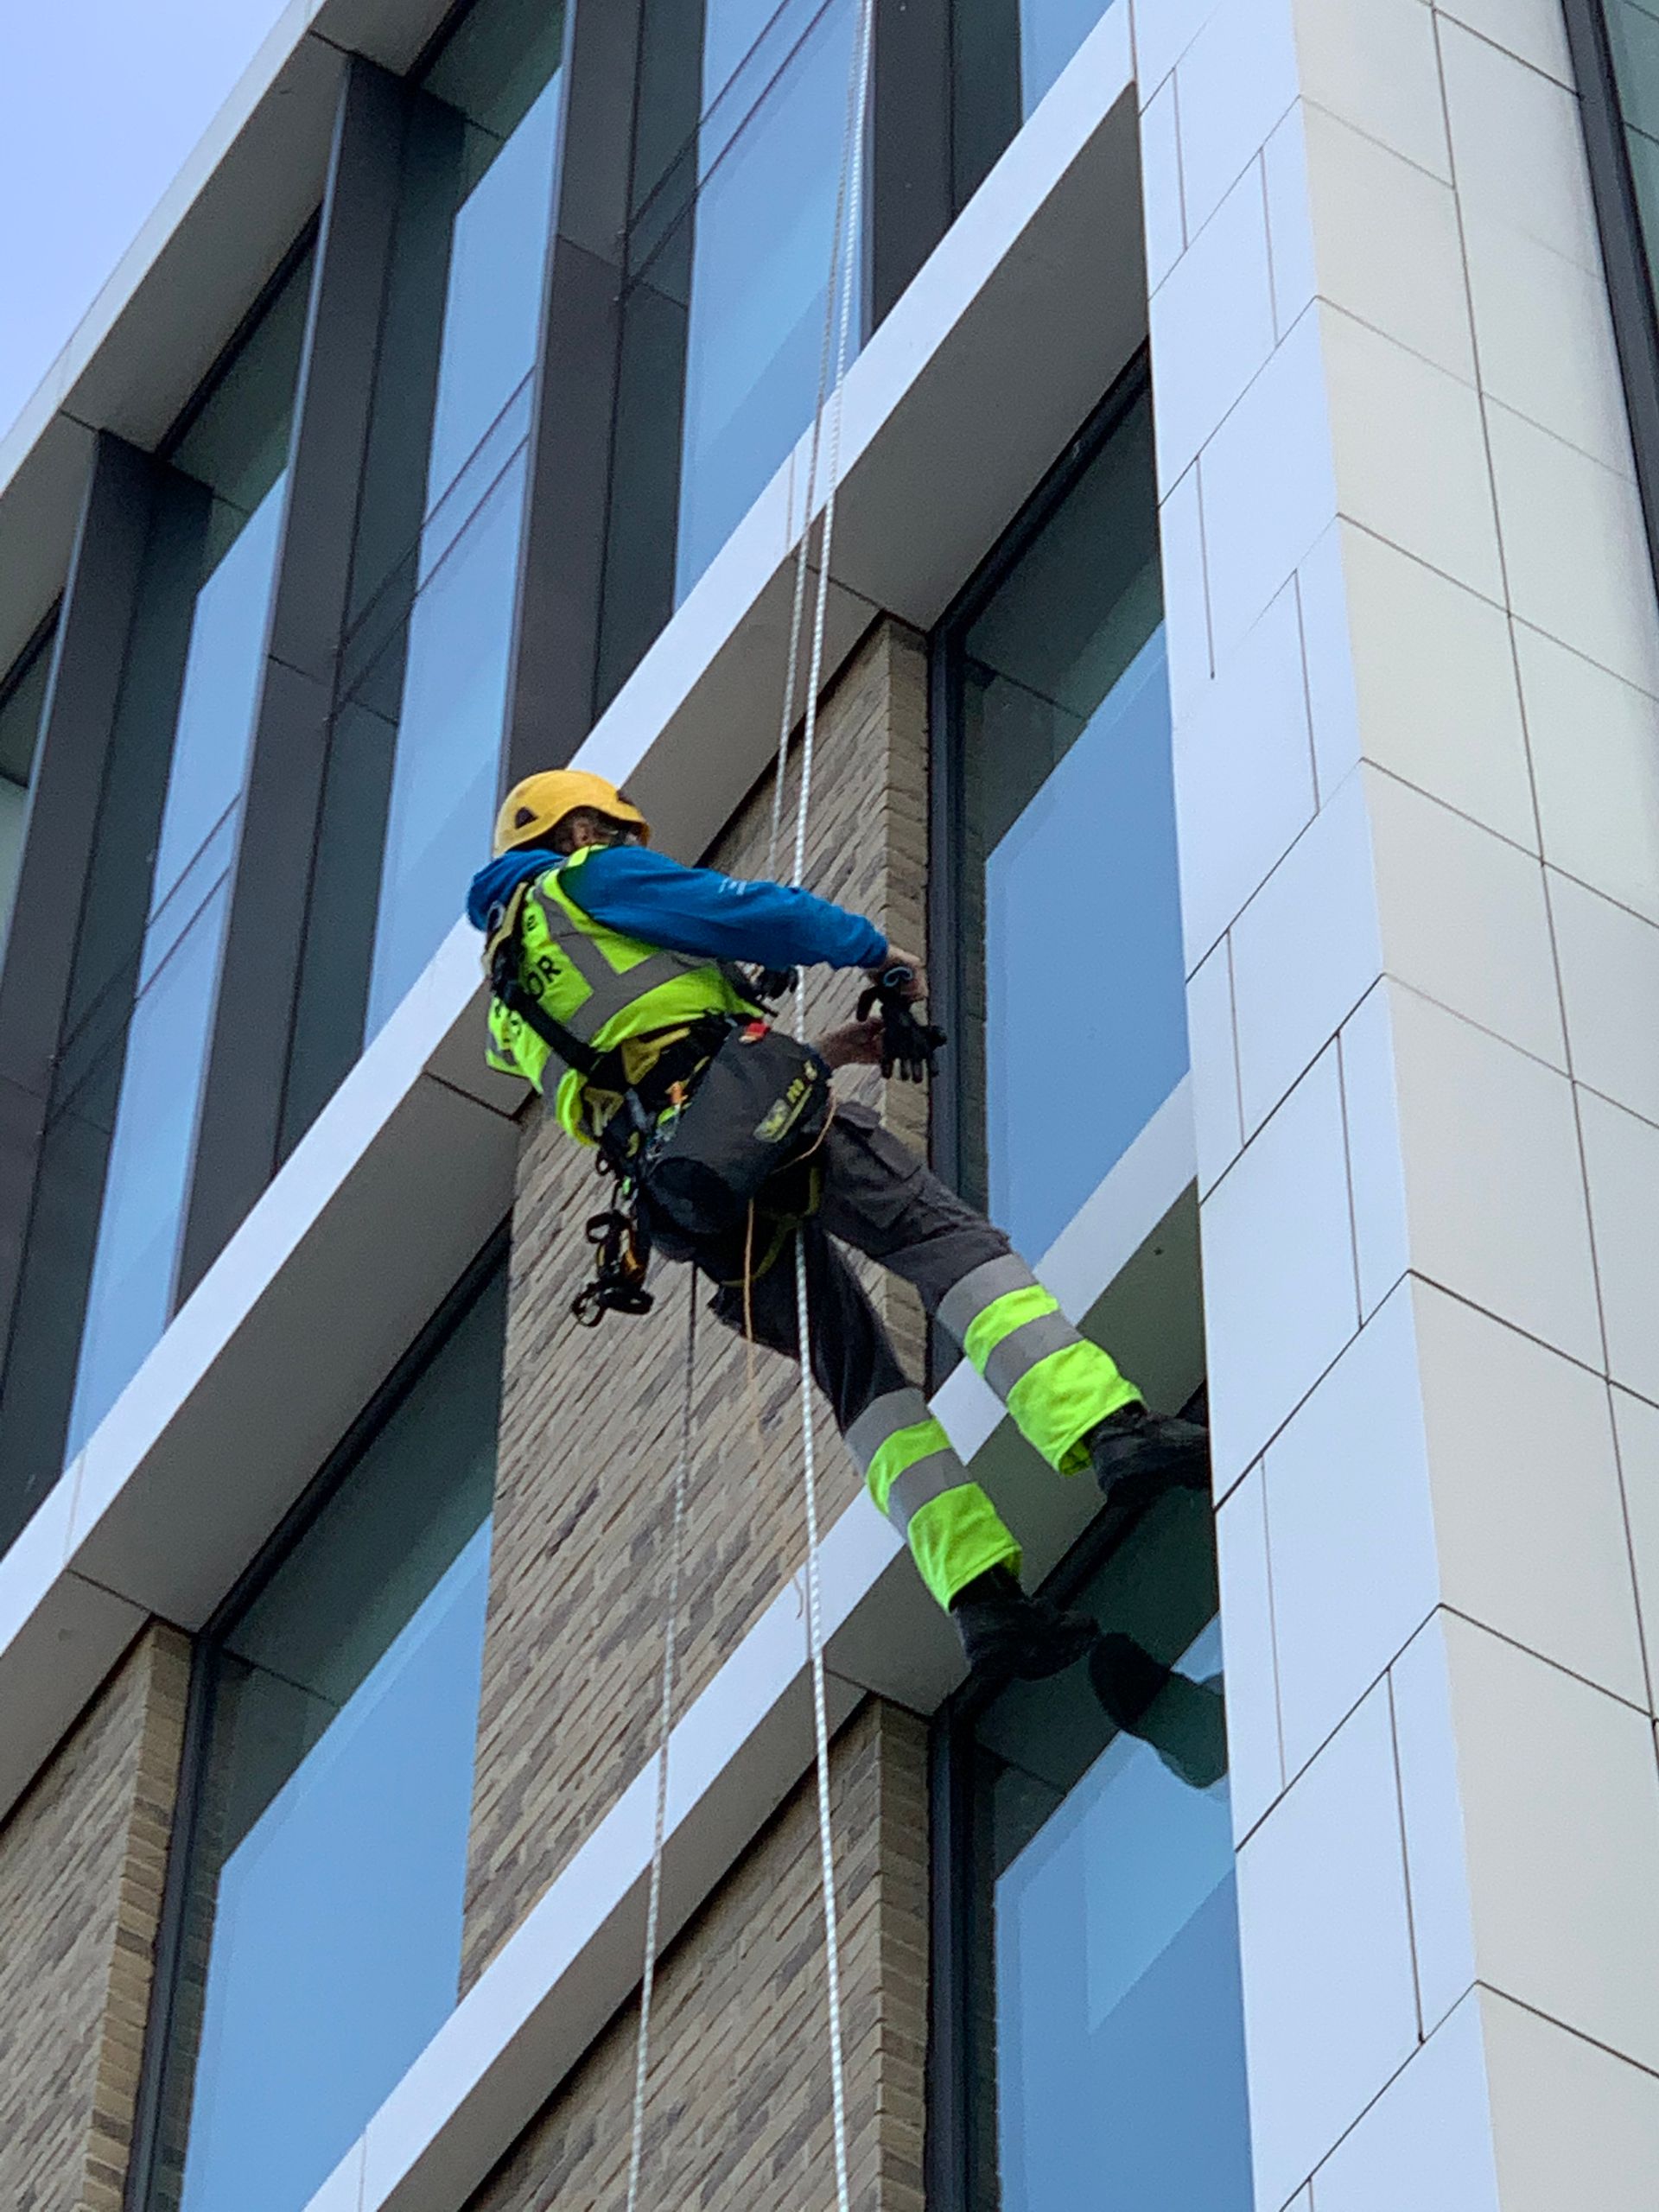 A man is climbing up the side of a building cleaning cladding.